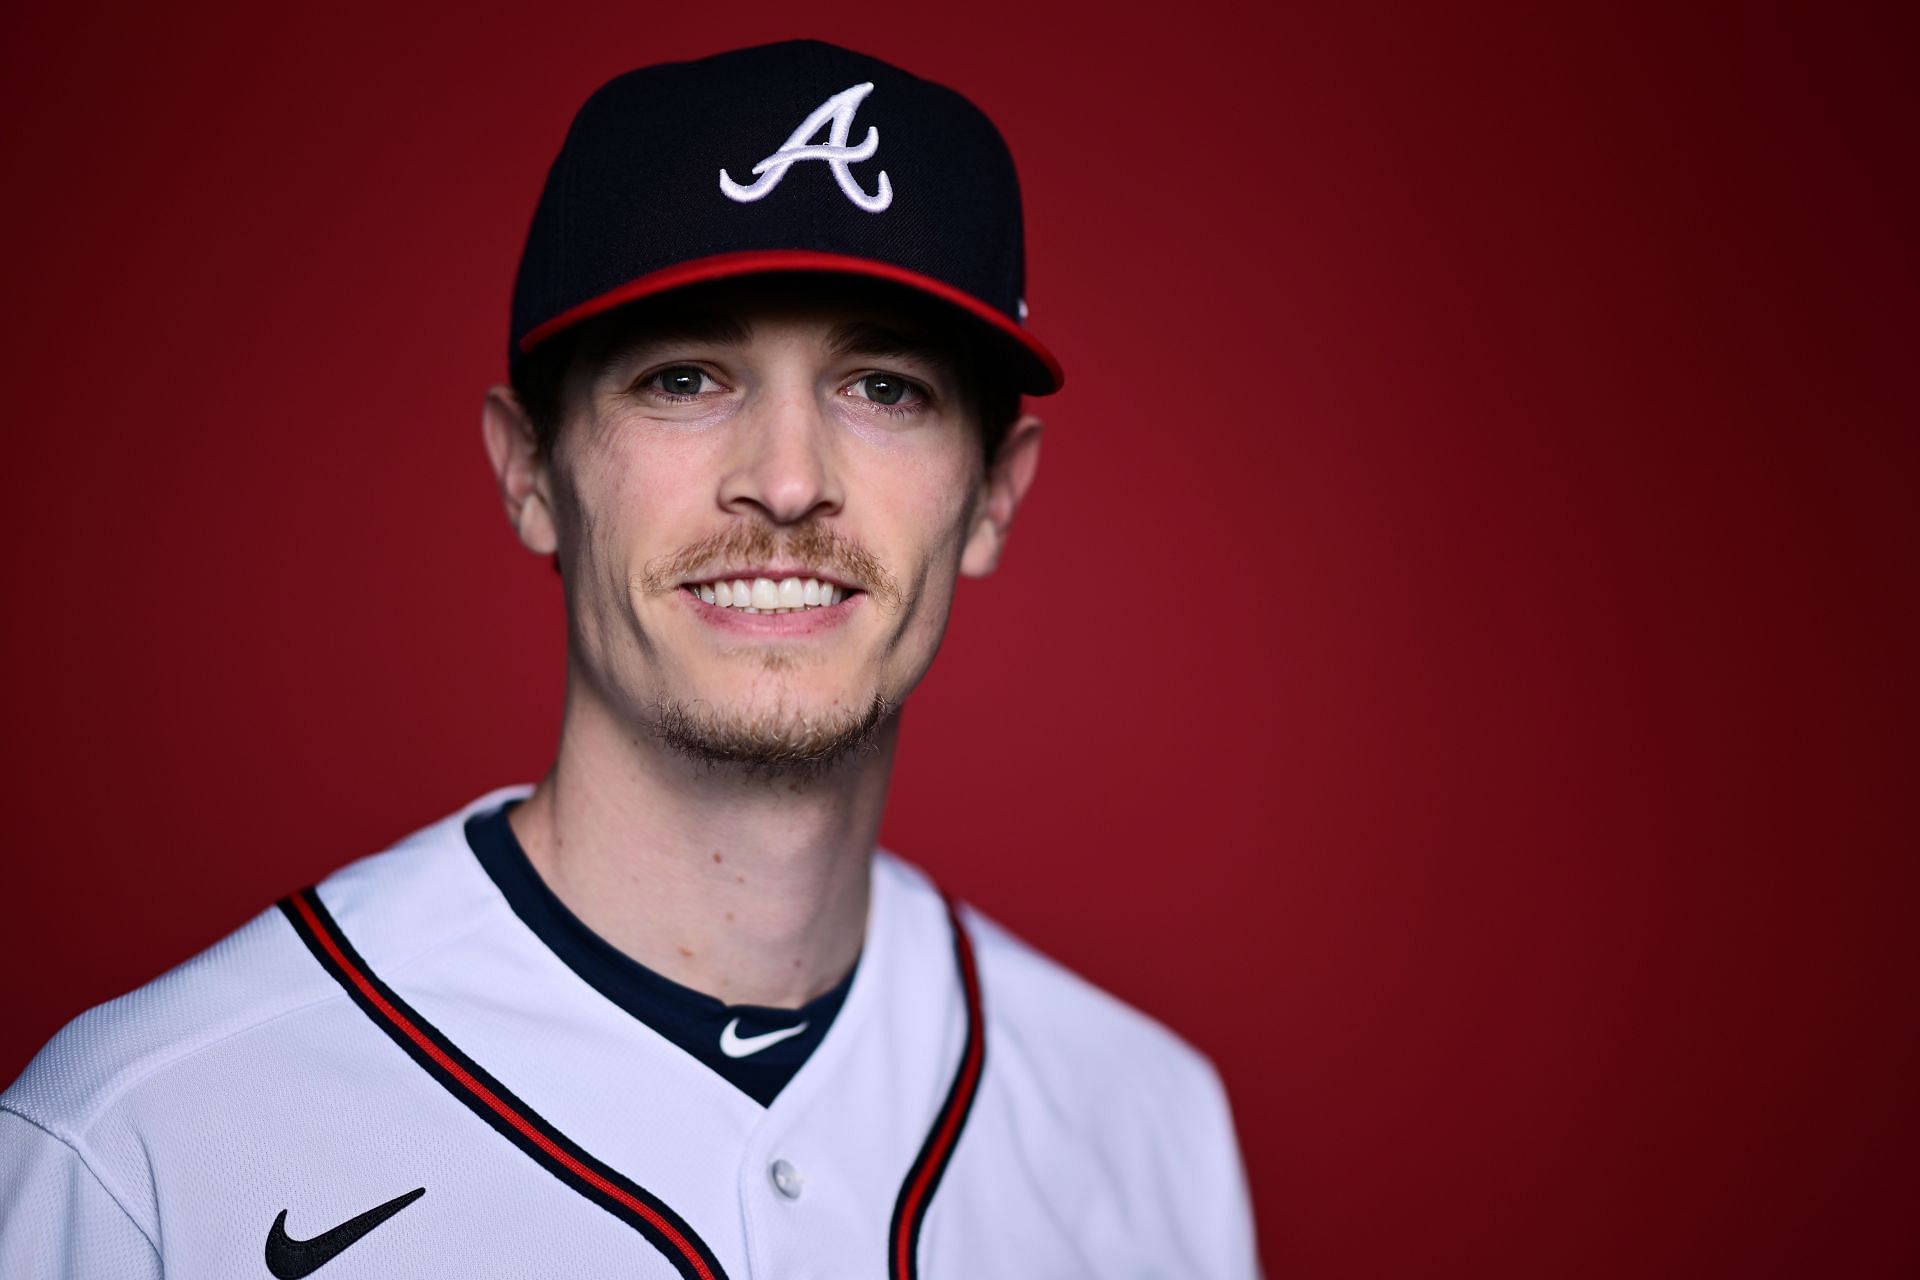 Braves] The #Braves today returned LHP Max Fried from his rehabilitation  assignment and reinstated him from the 60-day injured list. : r/baseball